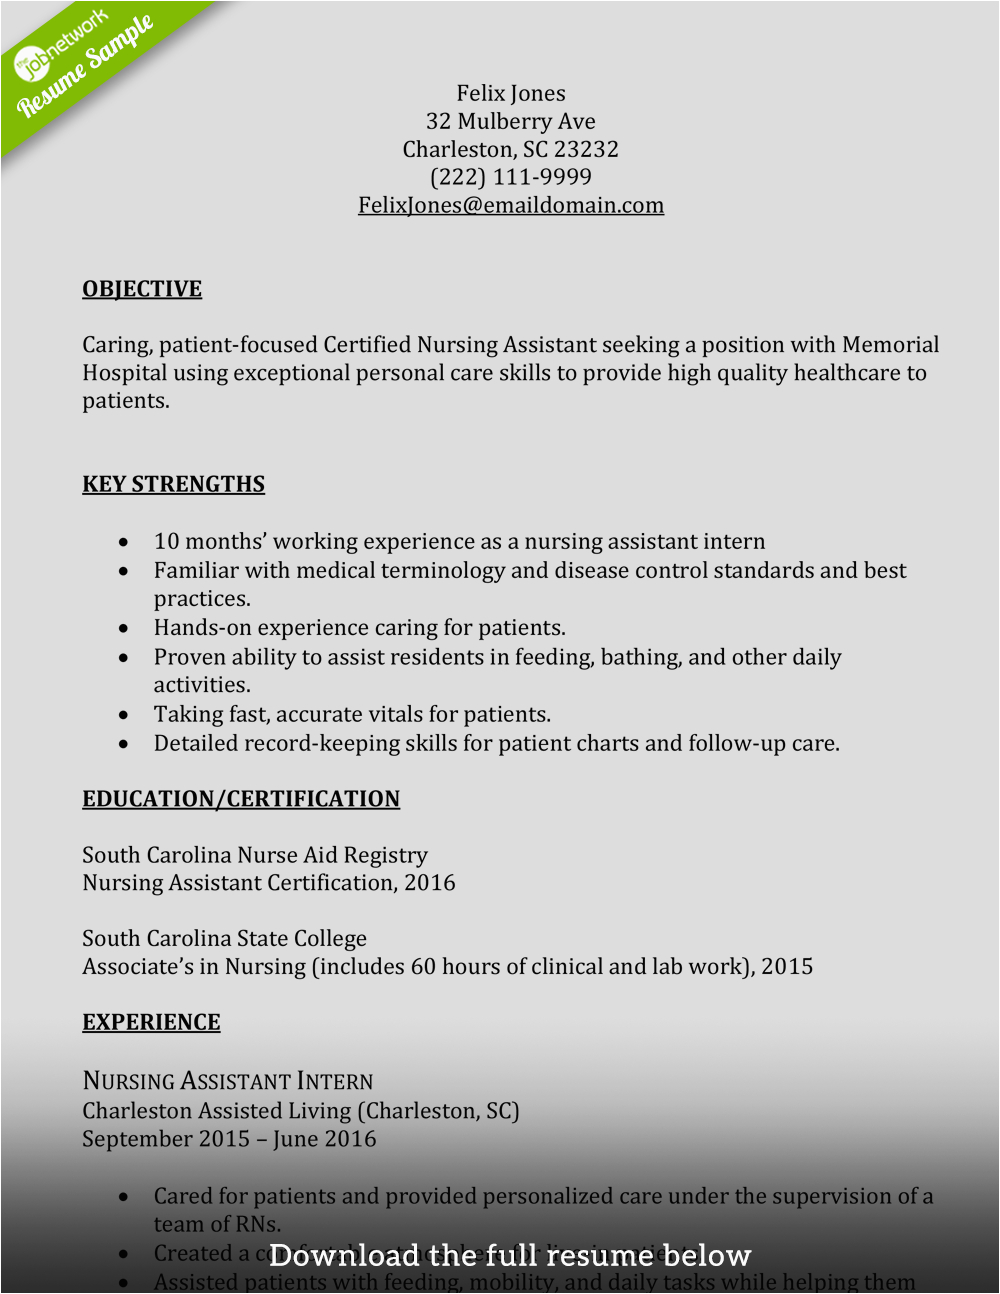 Sample Resume for Cna with No Previous Experience Resume format for Nursing assistant Nurse assistant Cna